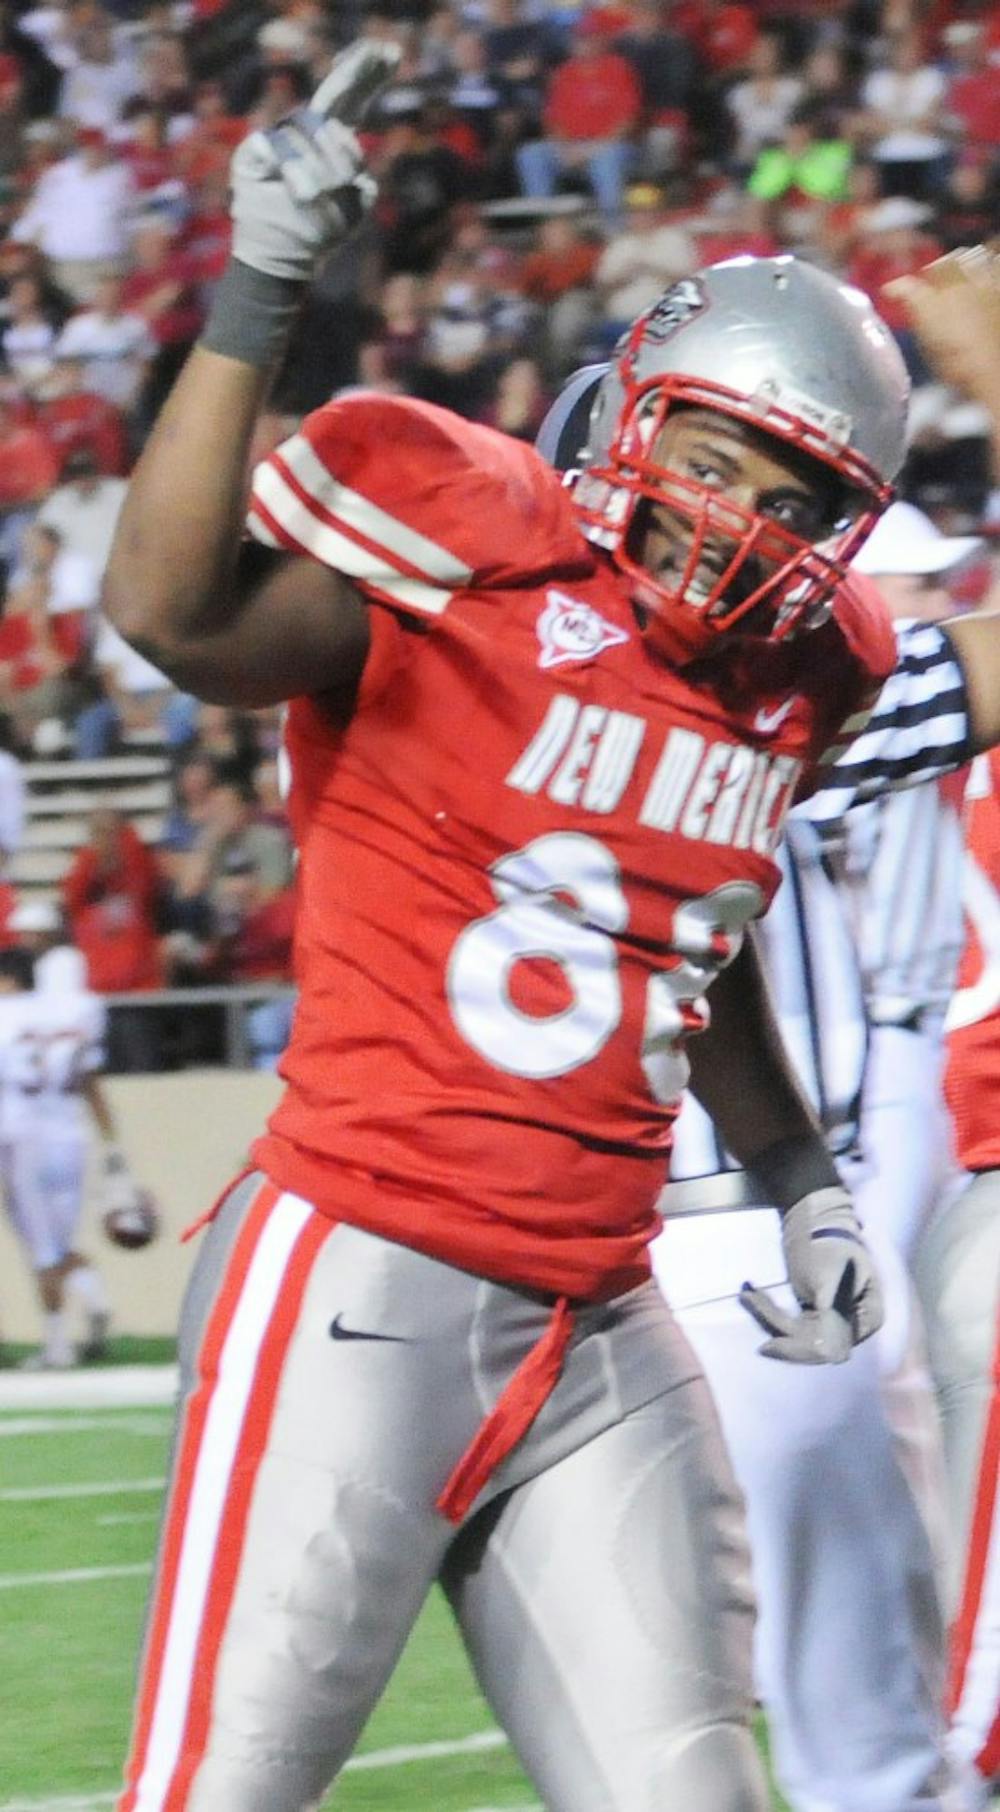 	Johnathan Rainey raises his arms in celebration in this file photo. The Lobos’ defensive end has 6 ½ sacks so far this season. The Lobos will head to Wyoming on Saturday in search of their first win.